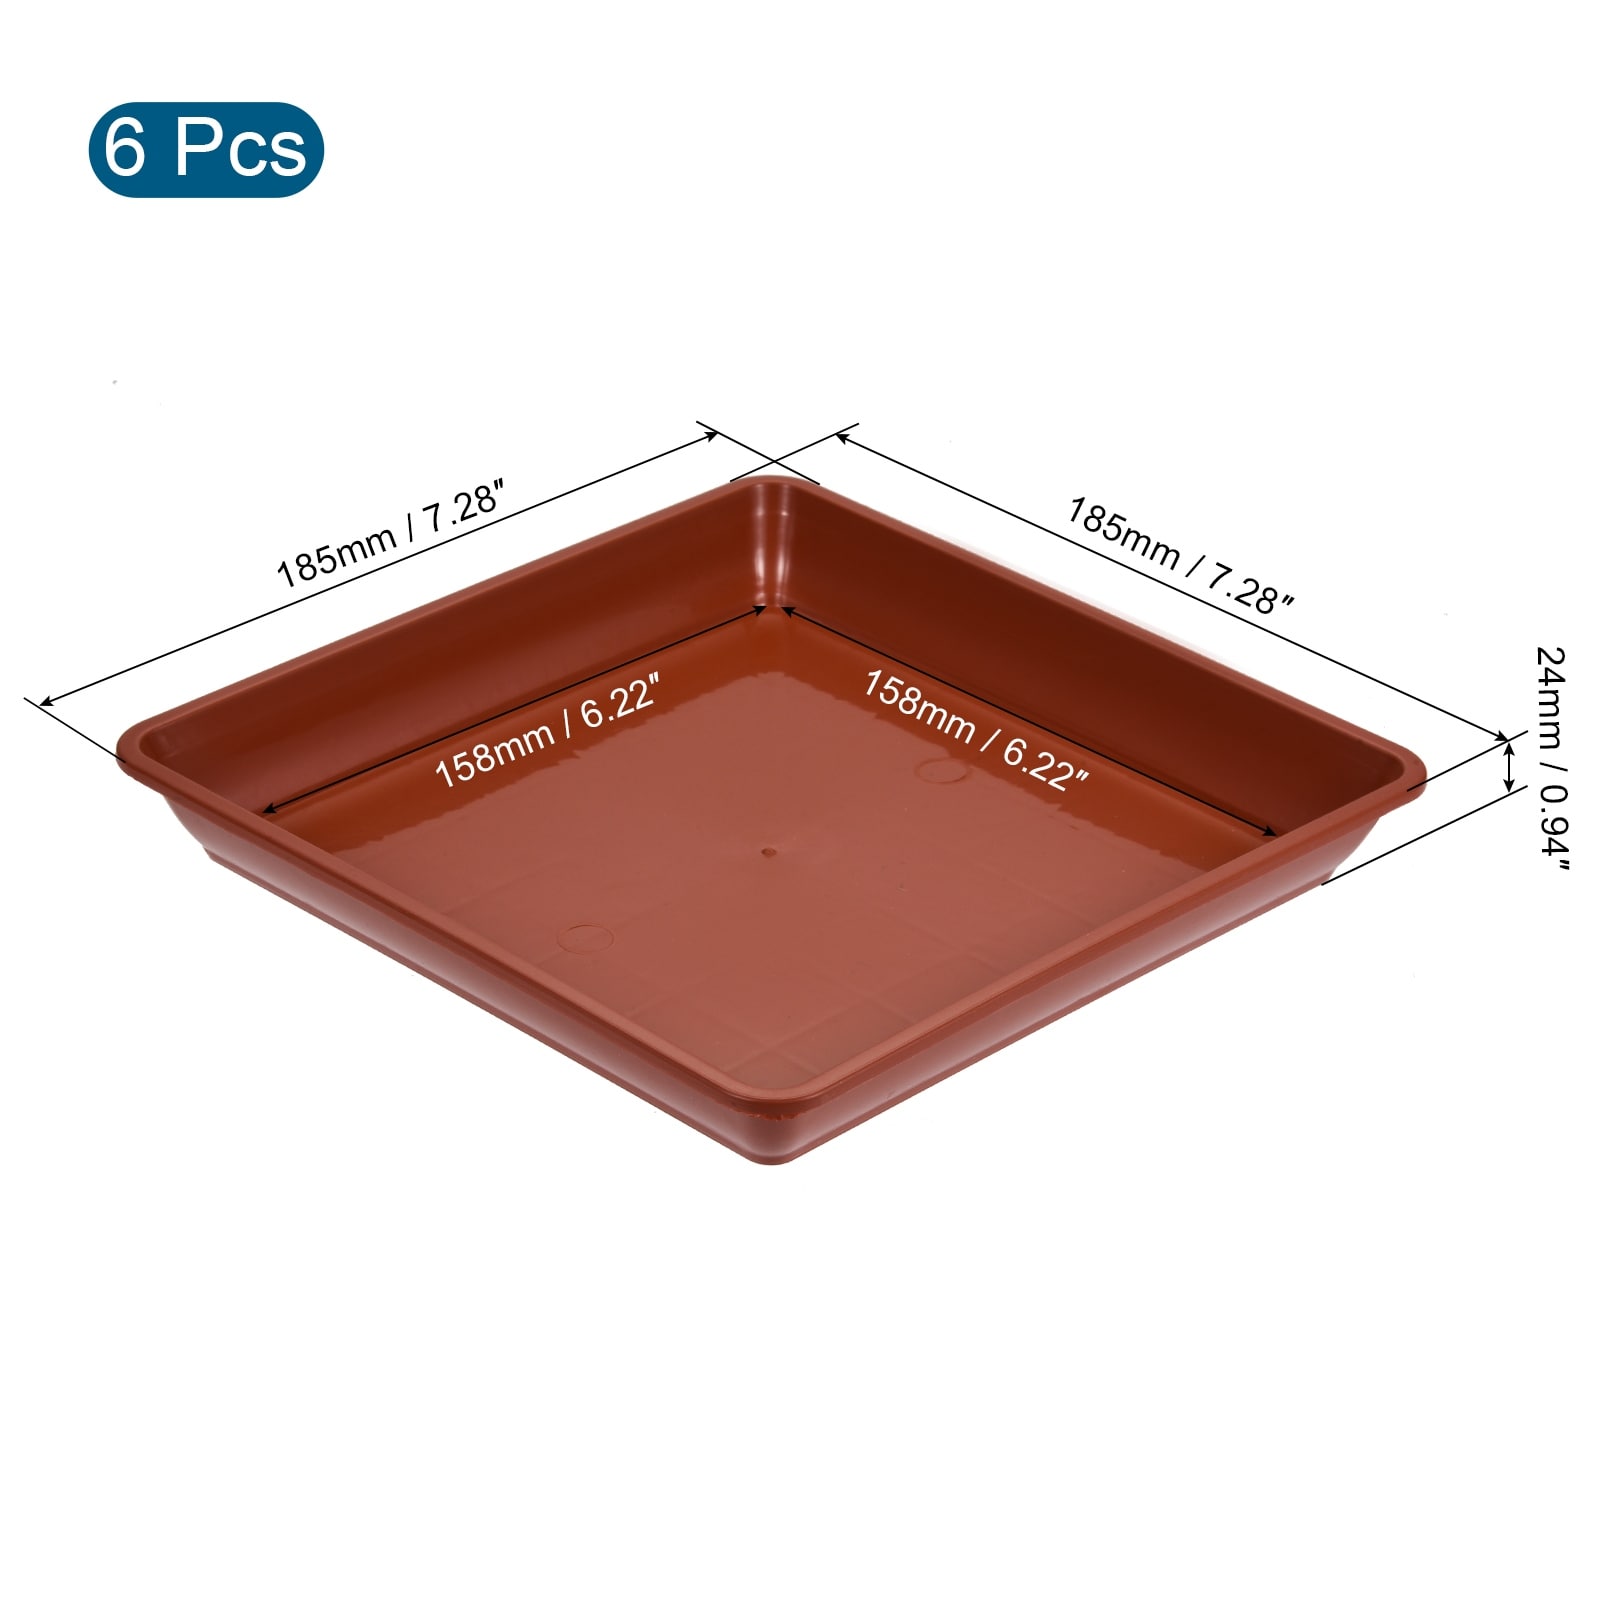 Plastic Tray Insert, 4 Section, for Shallow Trays, Pack of 6, FREE SHI -  NextGen Furniture, Inc.